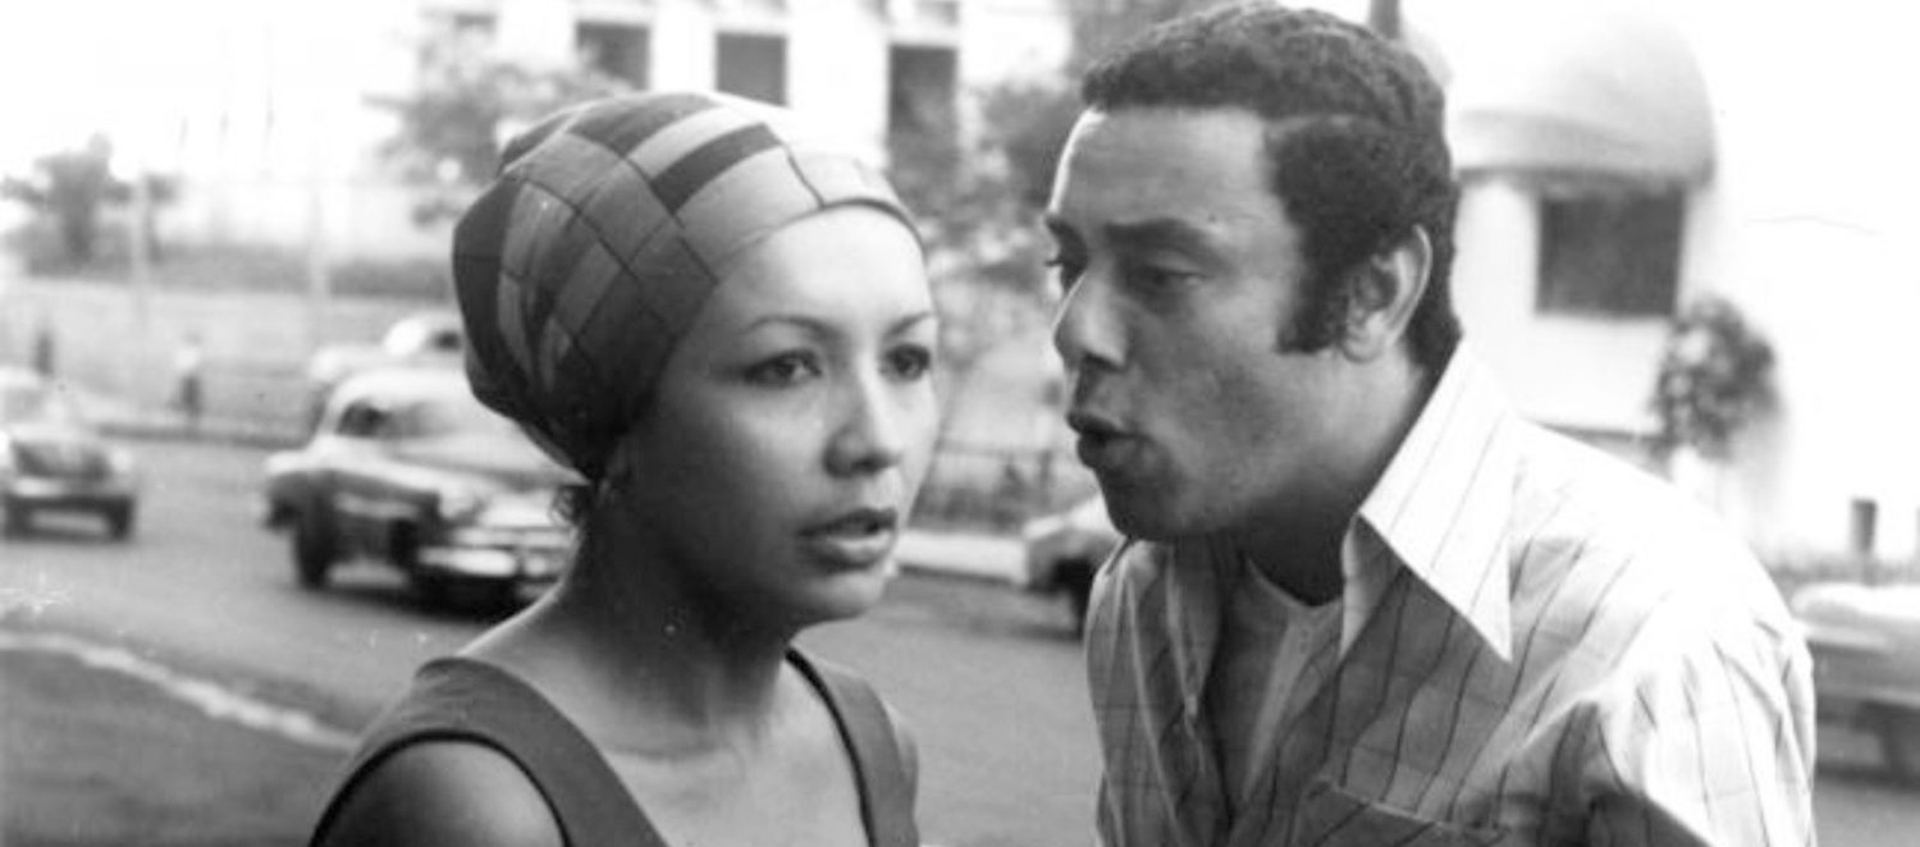 A black-and-white image of a woman and man on the street. The woman wears a cap covering her head and hair and wears a tank top. To her right a man in a button down shirt and t-shirt underneath speaks to her.